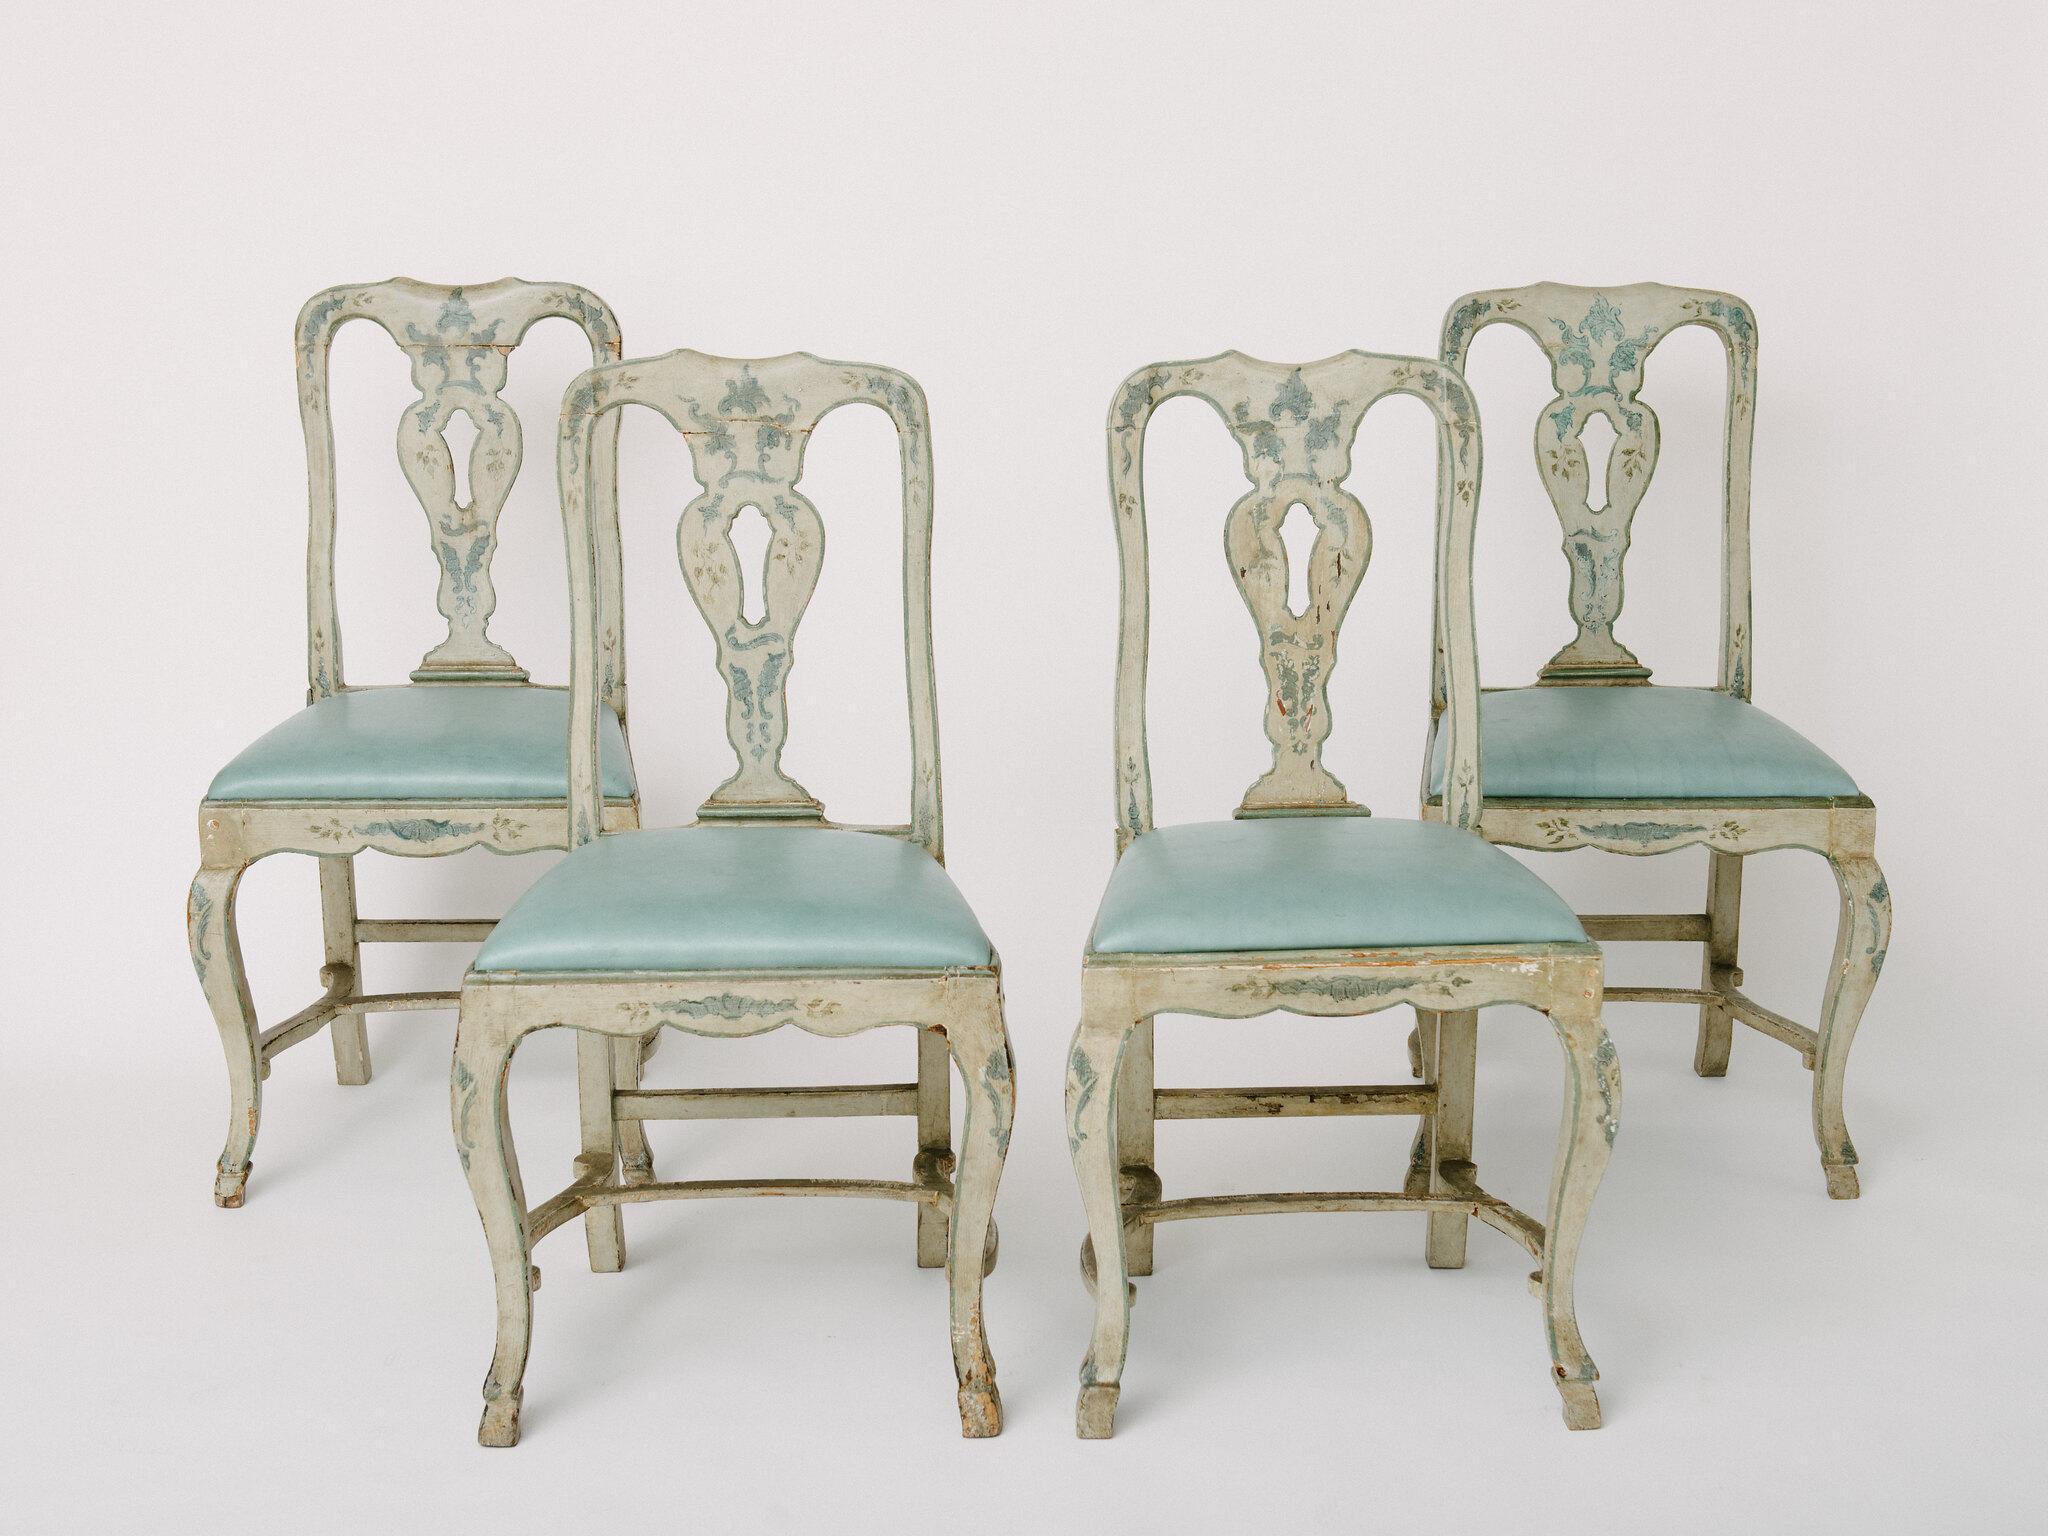 18th century blue-gray painted Venetian side chairs with leather seats. Chairs have a Heraldic style cross maker's mark engraved on backs of chairs. Features hand carved stretchers and pied-de-biche hooves, seat covered in a sky blue leather. Uneven